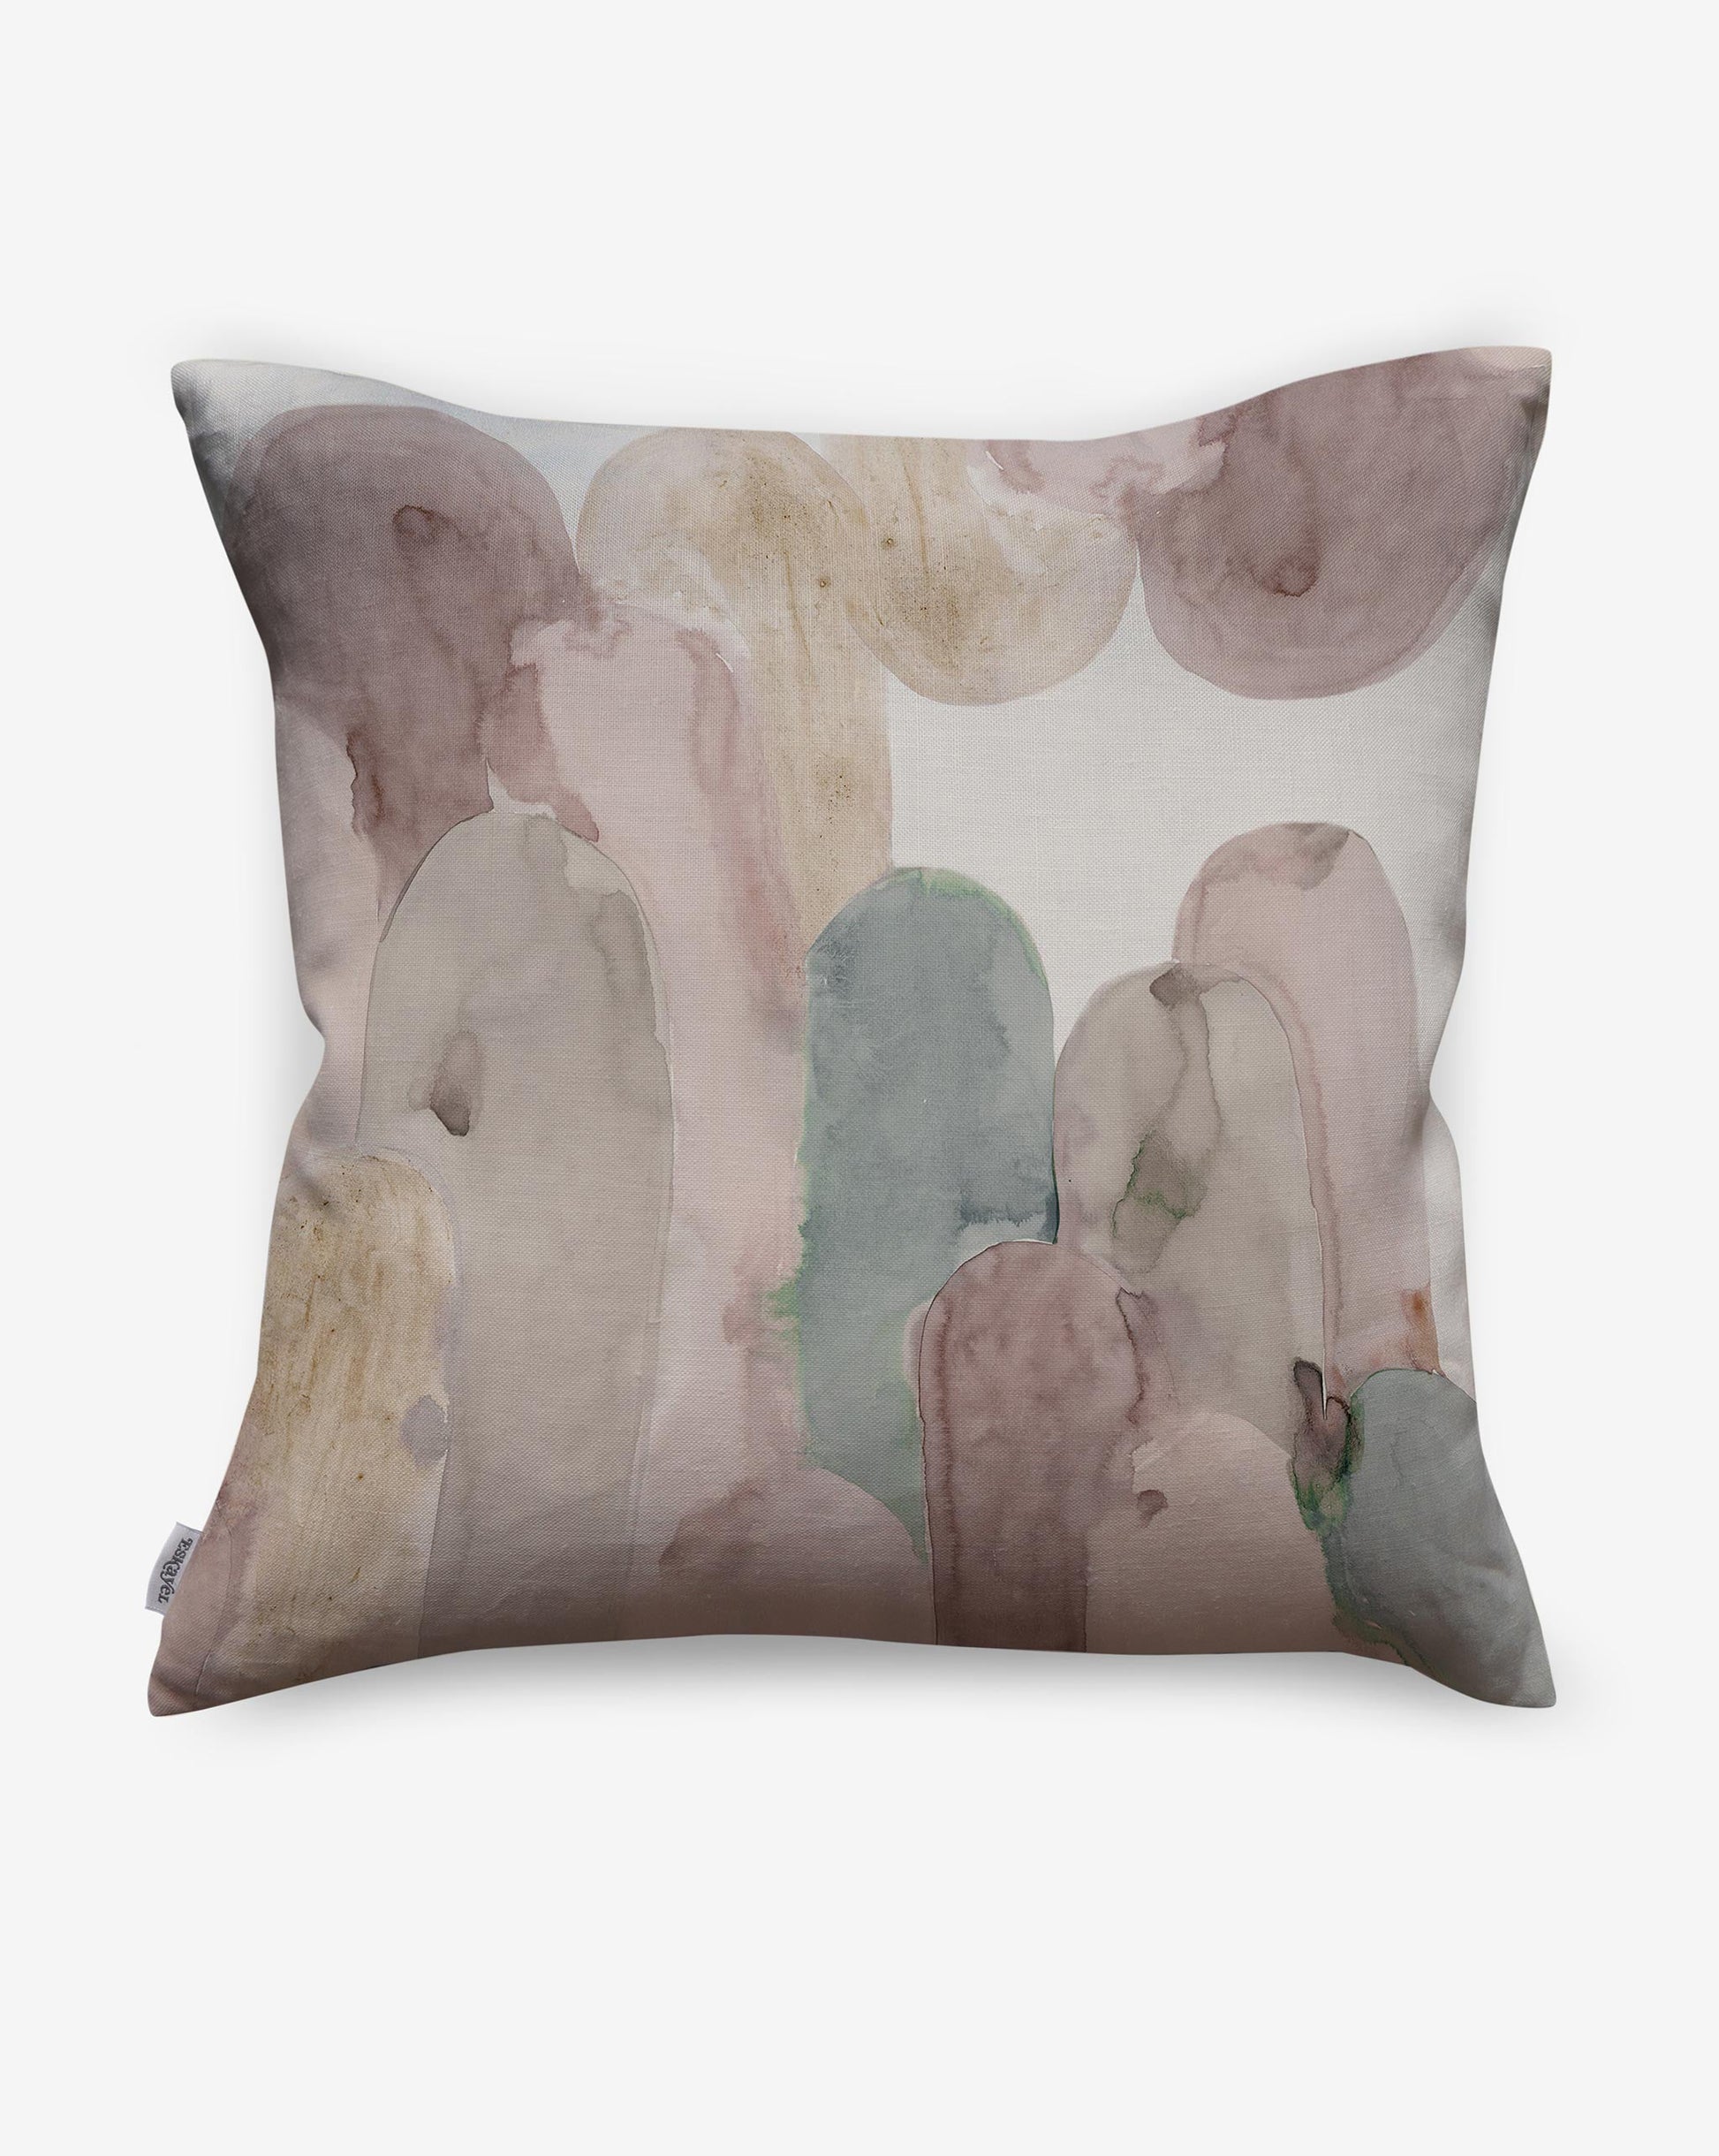 Arcos luxury pillows in Dusk offer muted pinks and sage green as a soft geometric pattern of curves and columns.